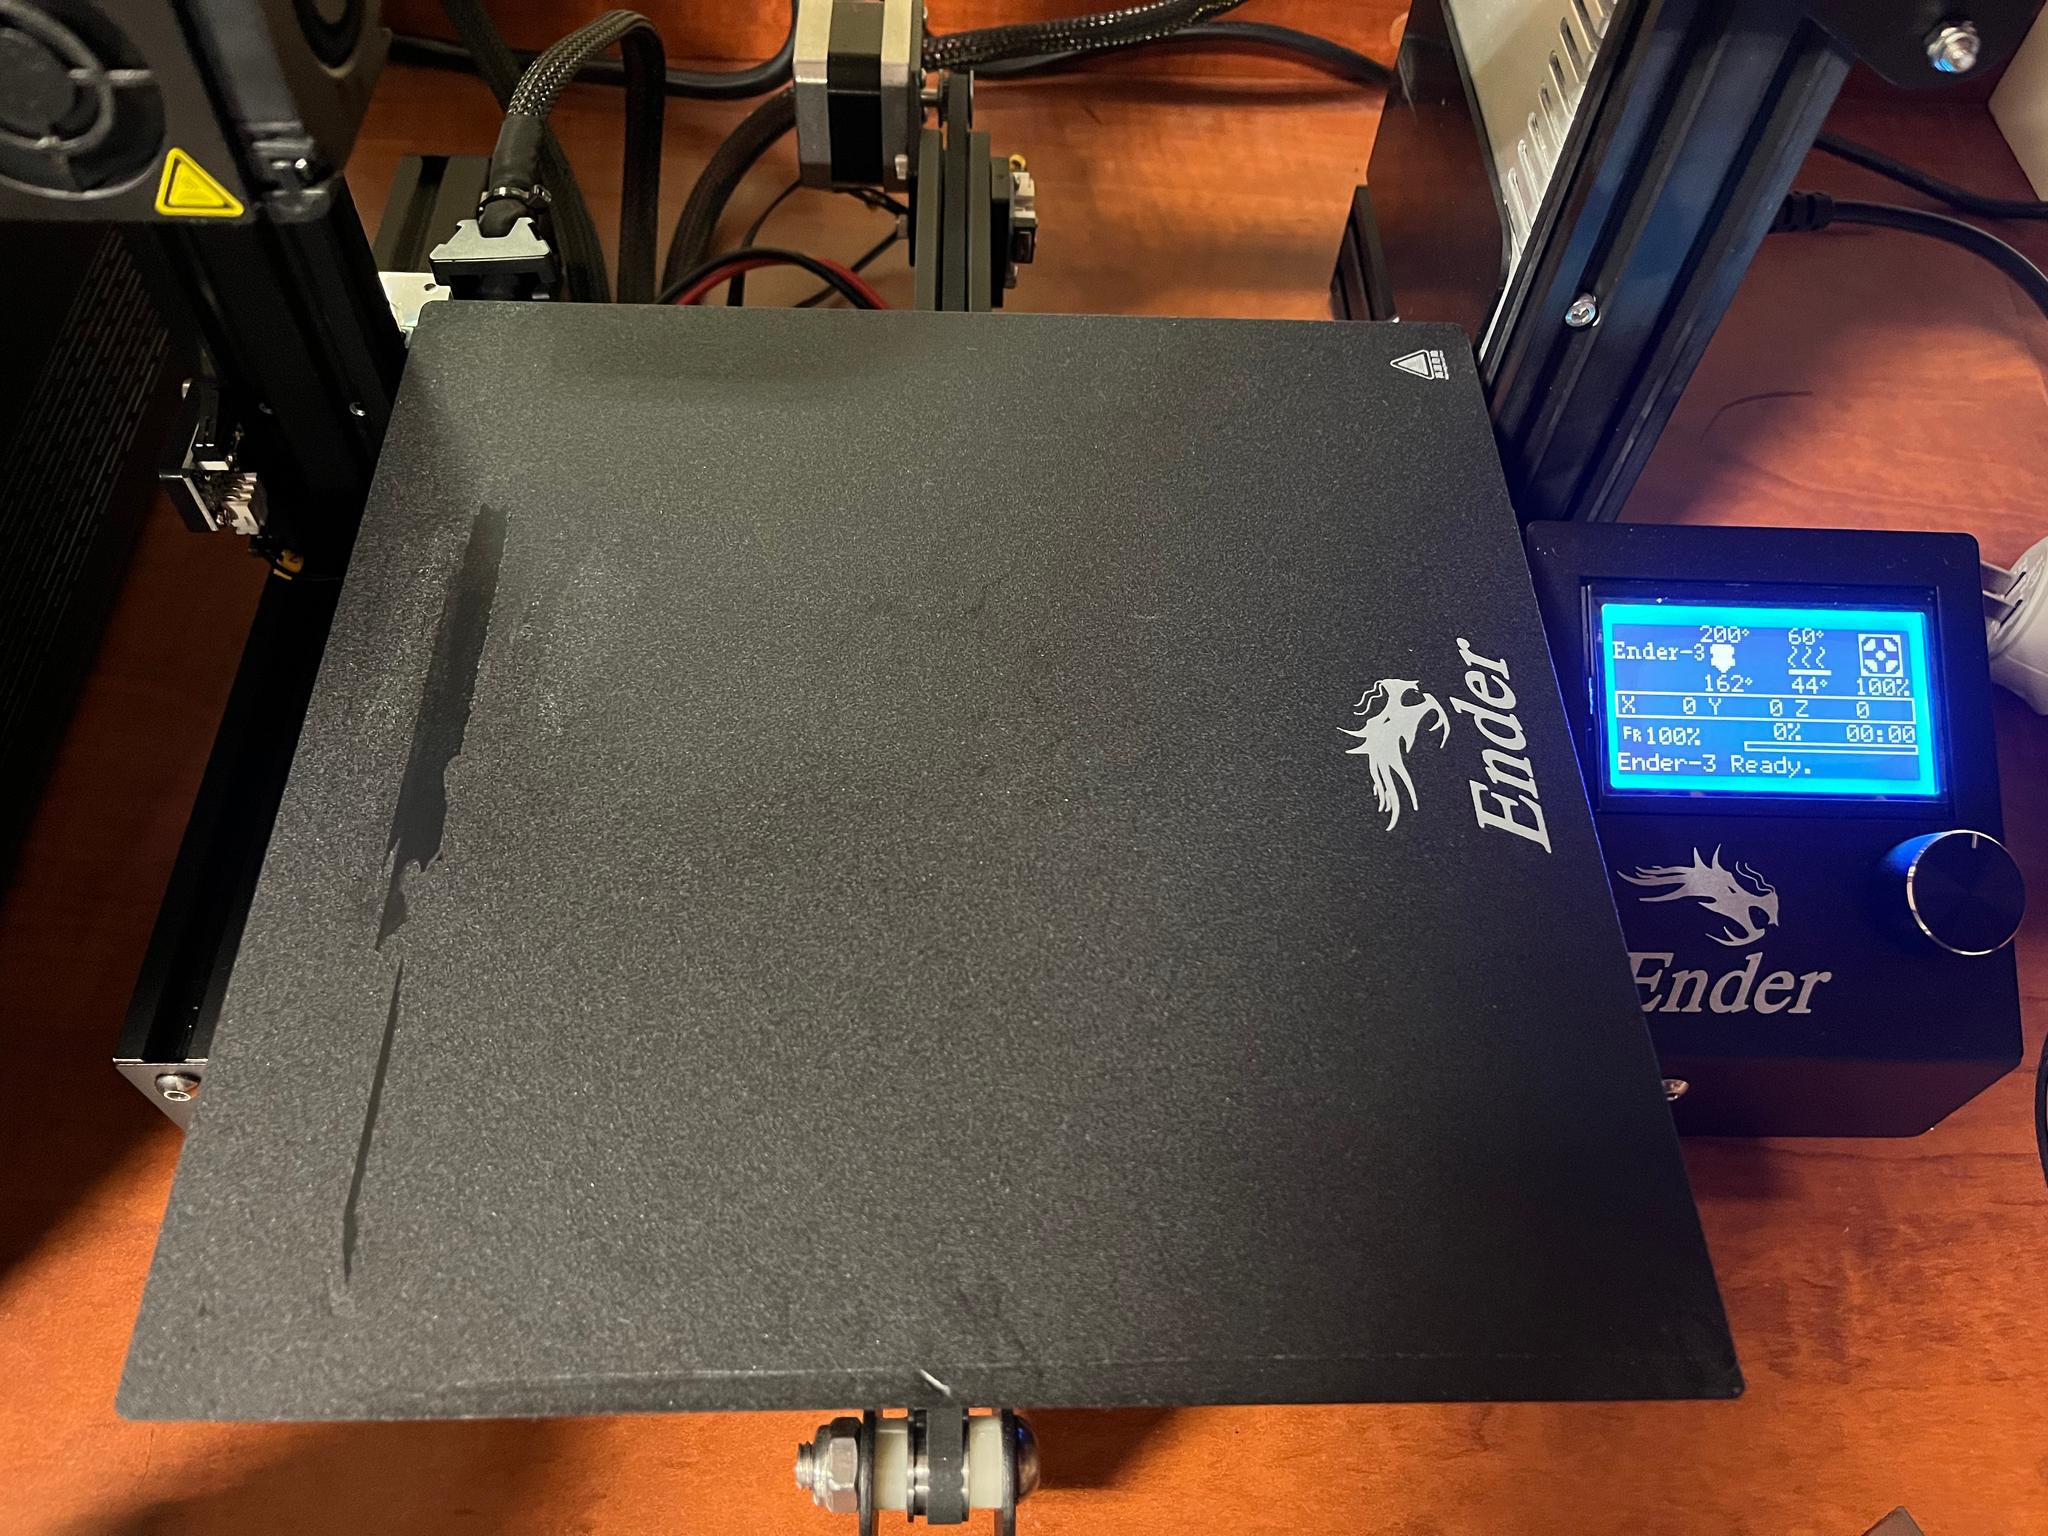 Removed extra overhang on magnetic print bed to fit properly.